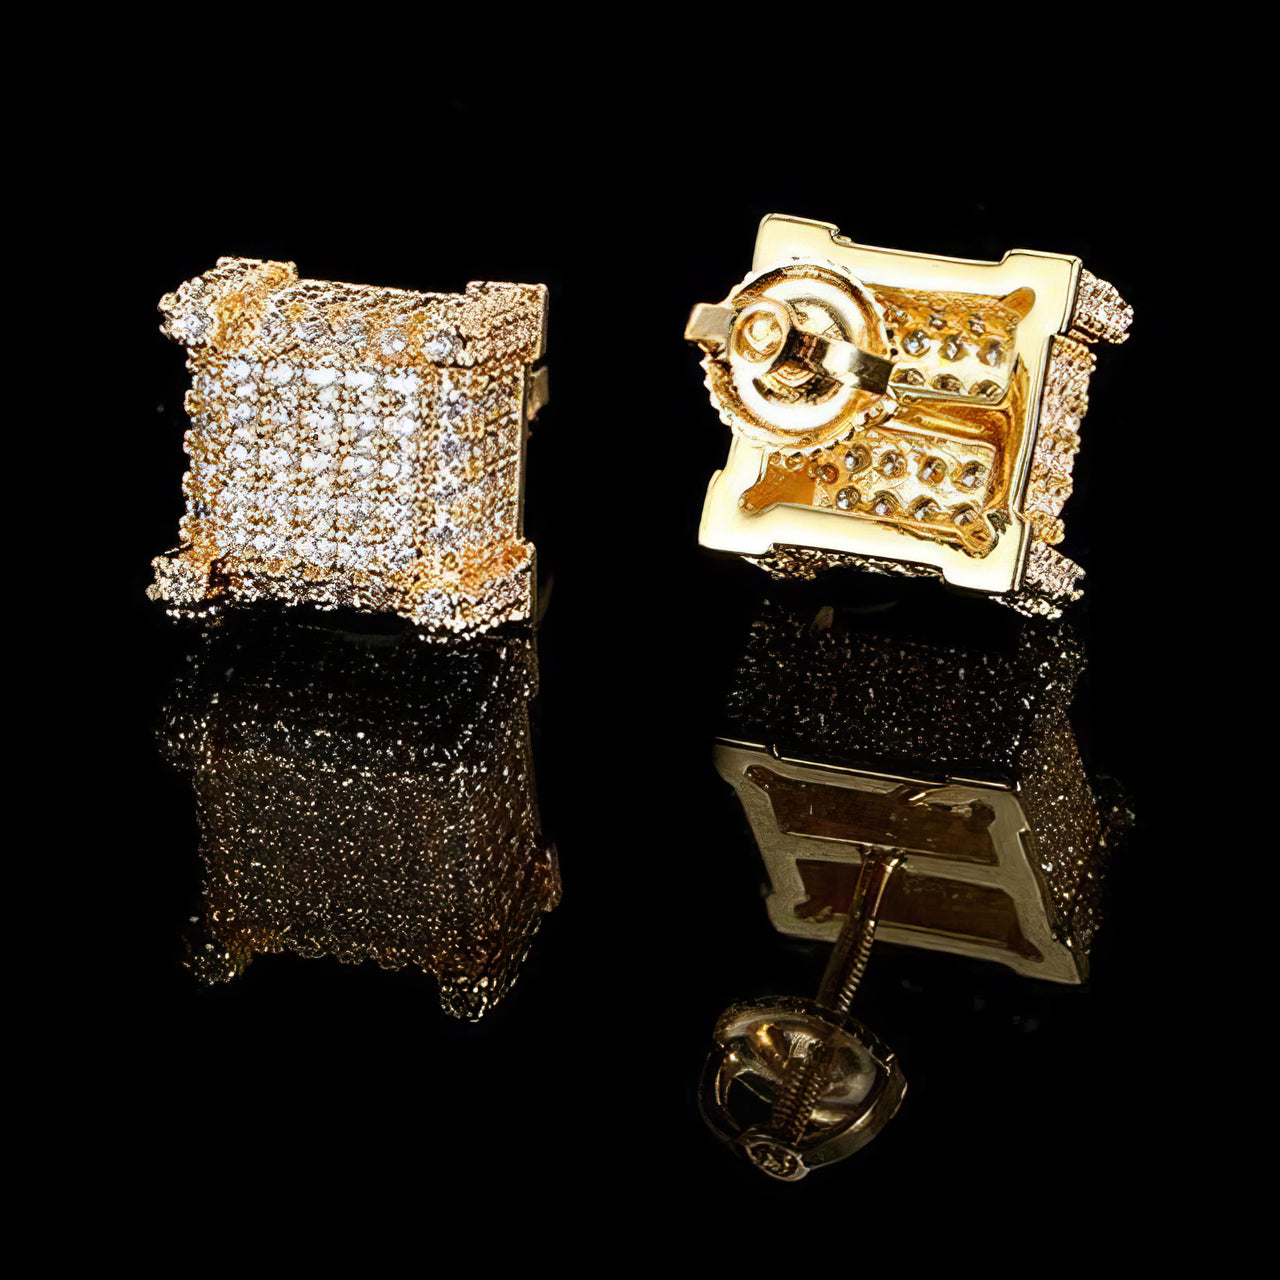 10mm Square Paved Diamond Stud Earrings - Different Drips